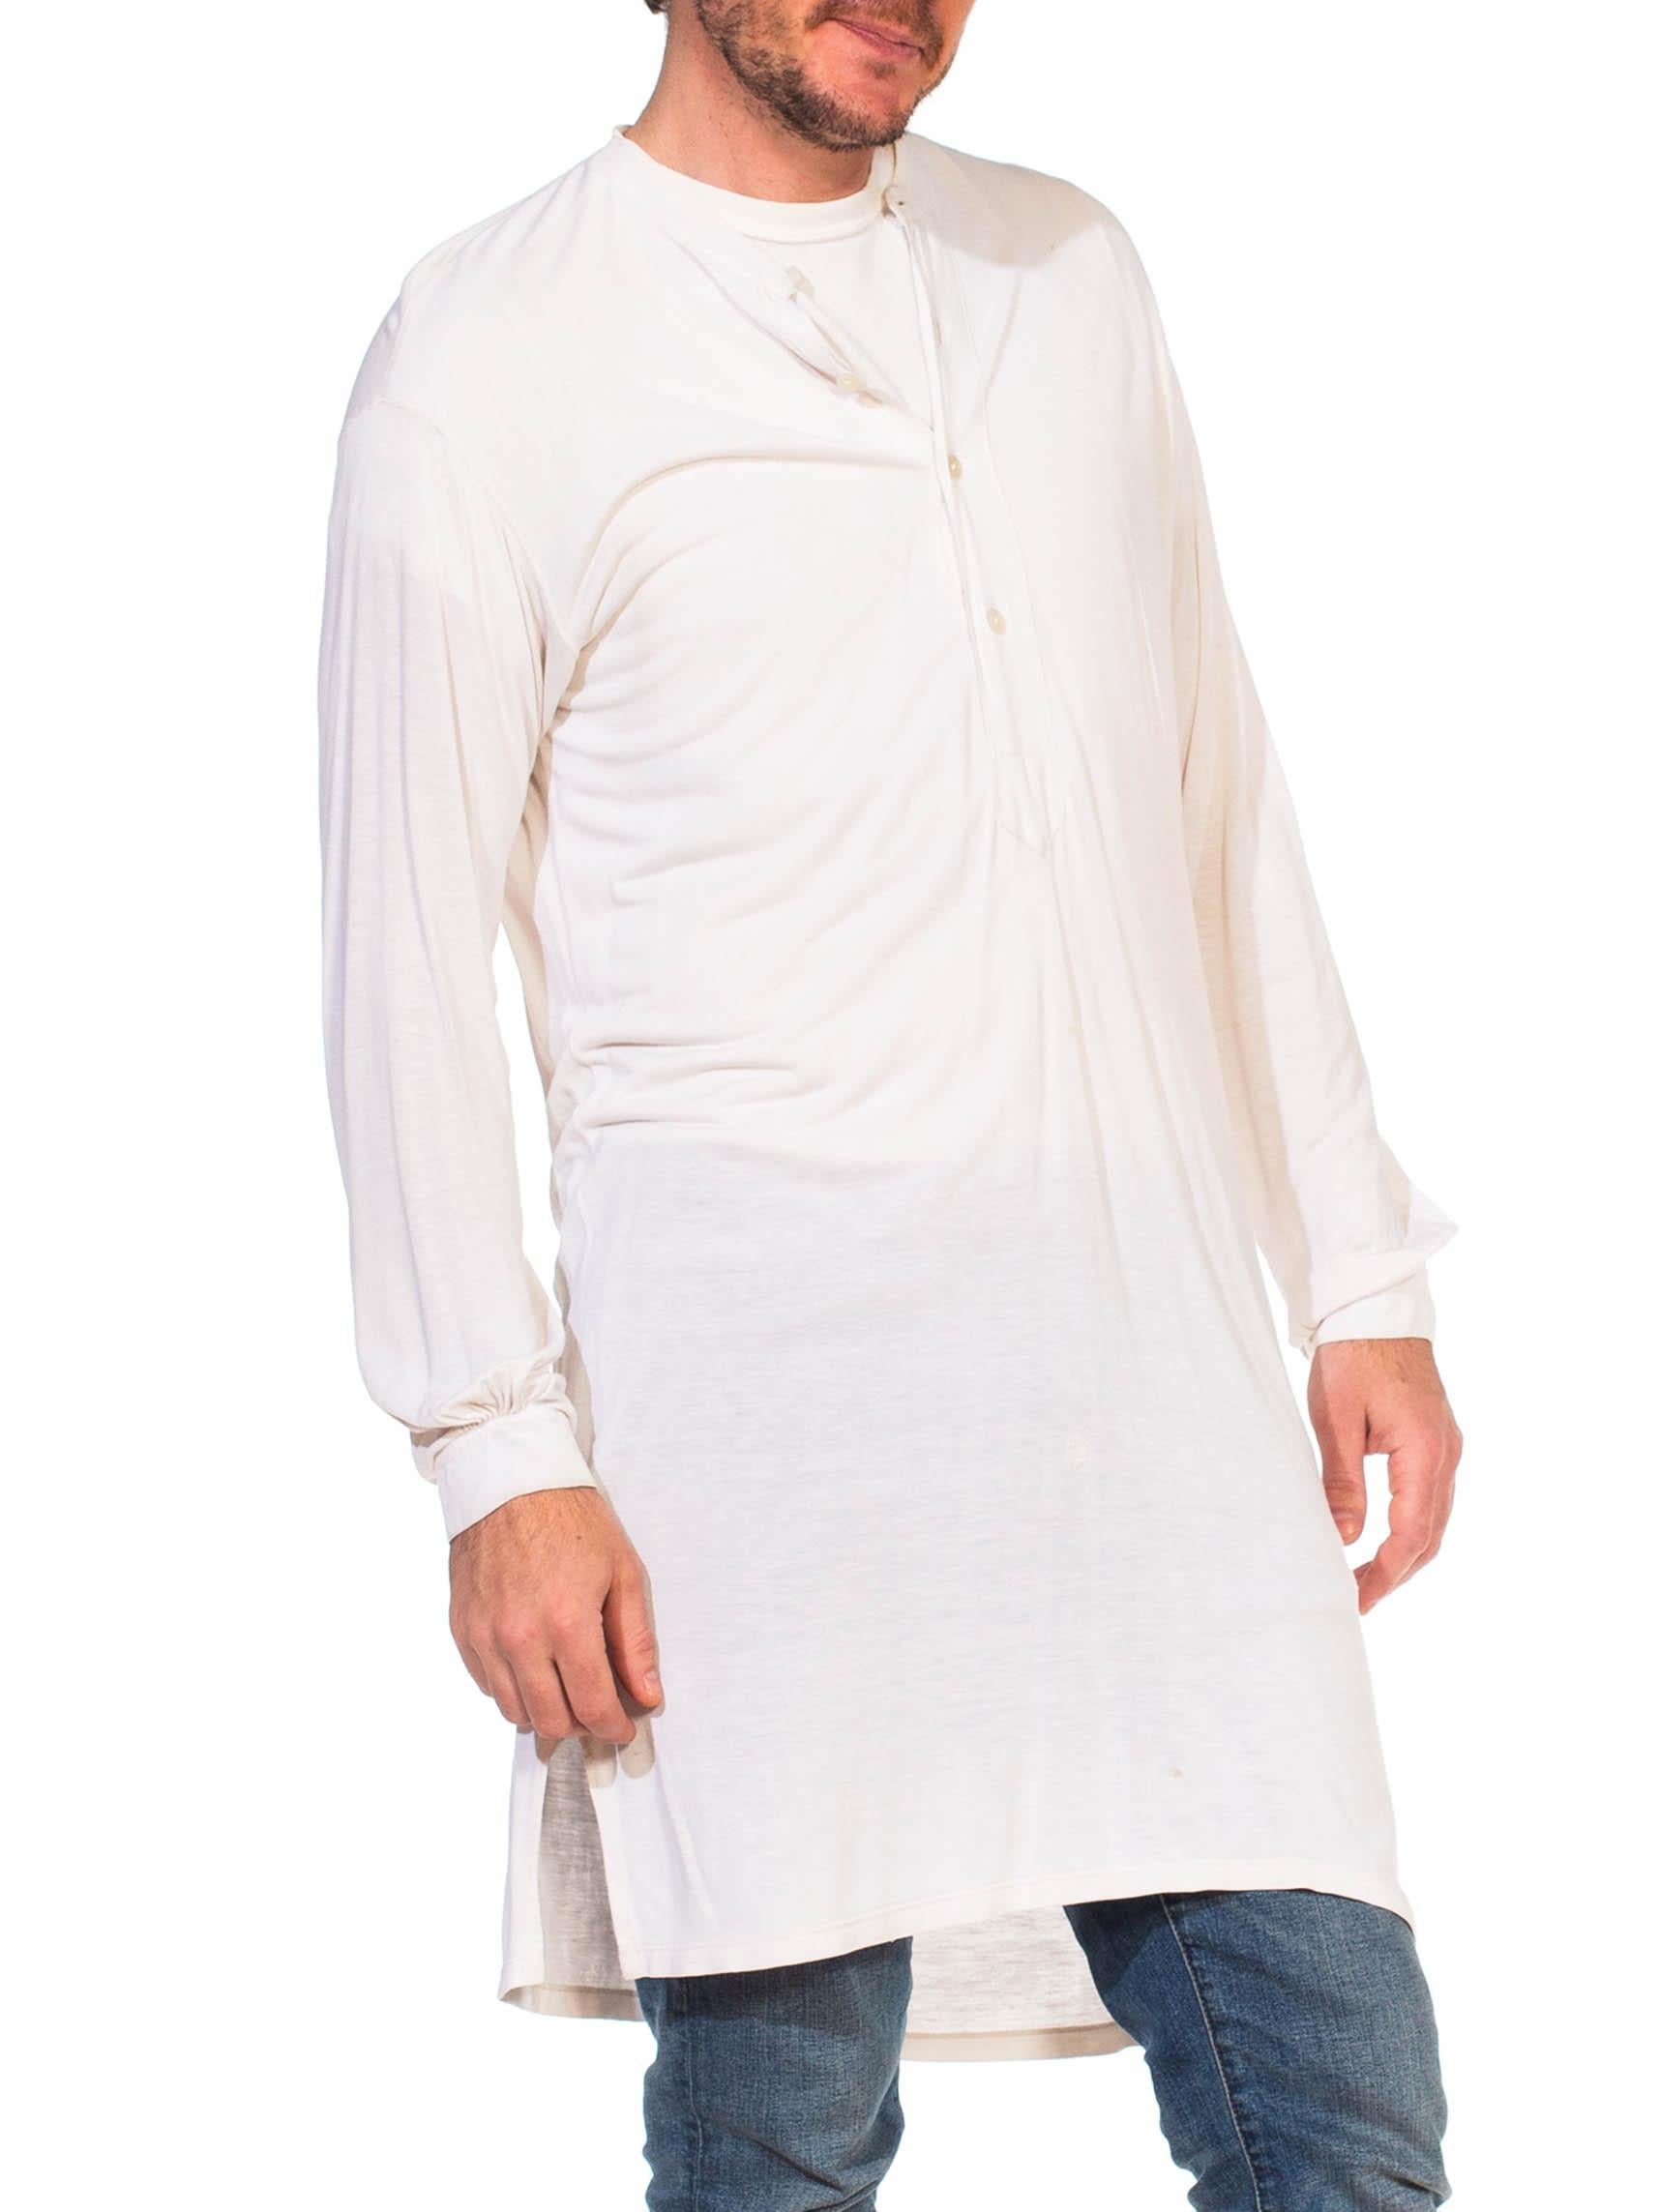 1920S Recenia White Cotton Blend Jersey Men's Collarless Under Shirt In Excellent Condition For Sale In New York, NY